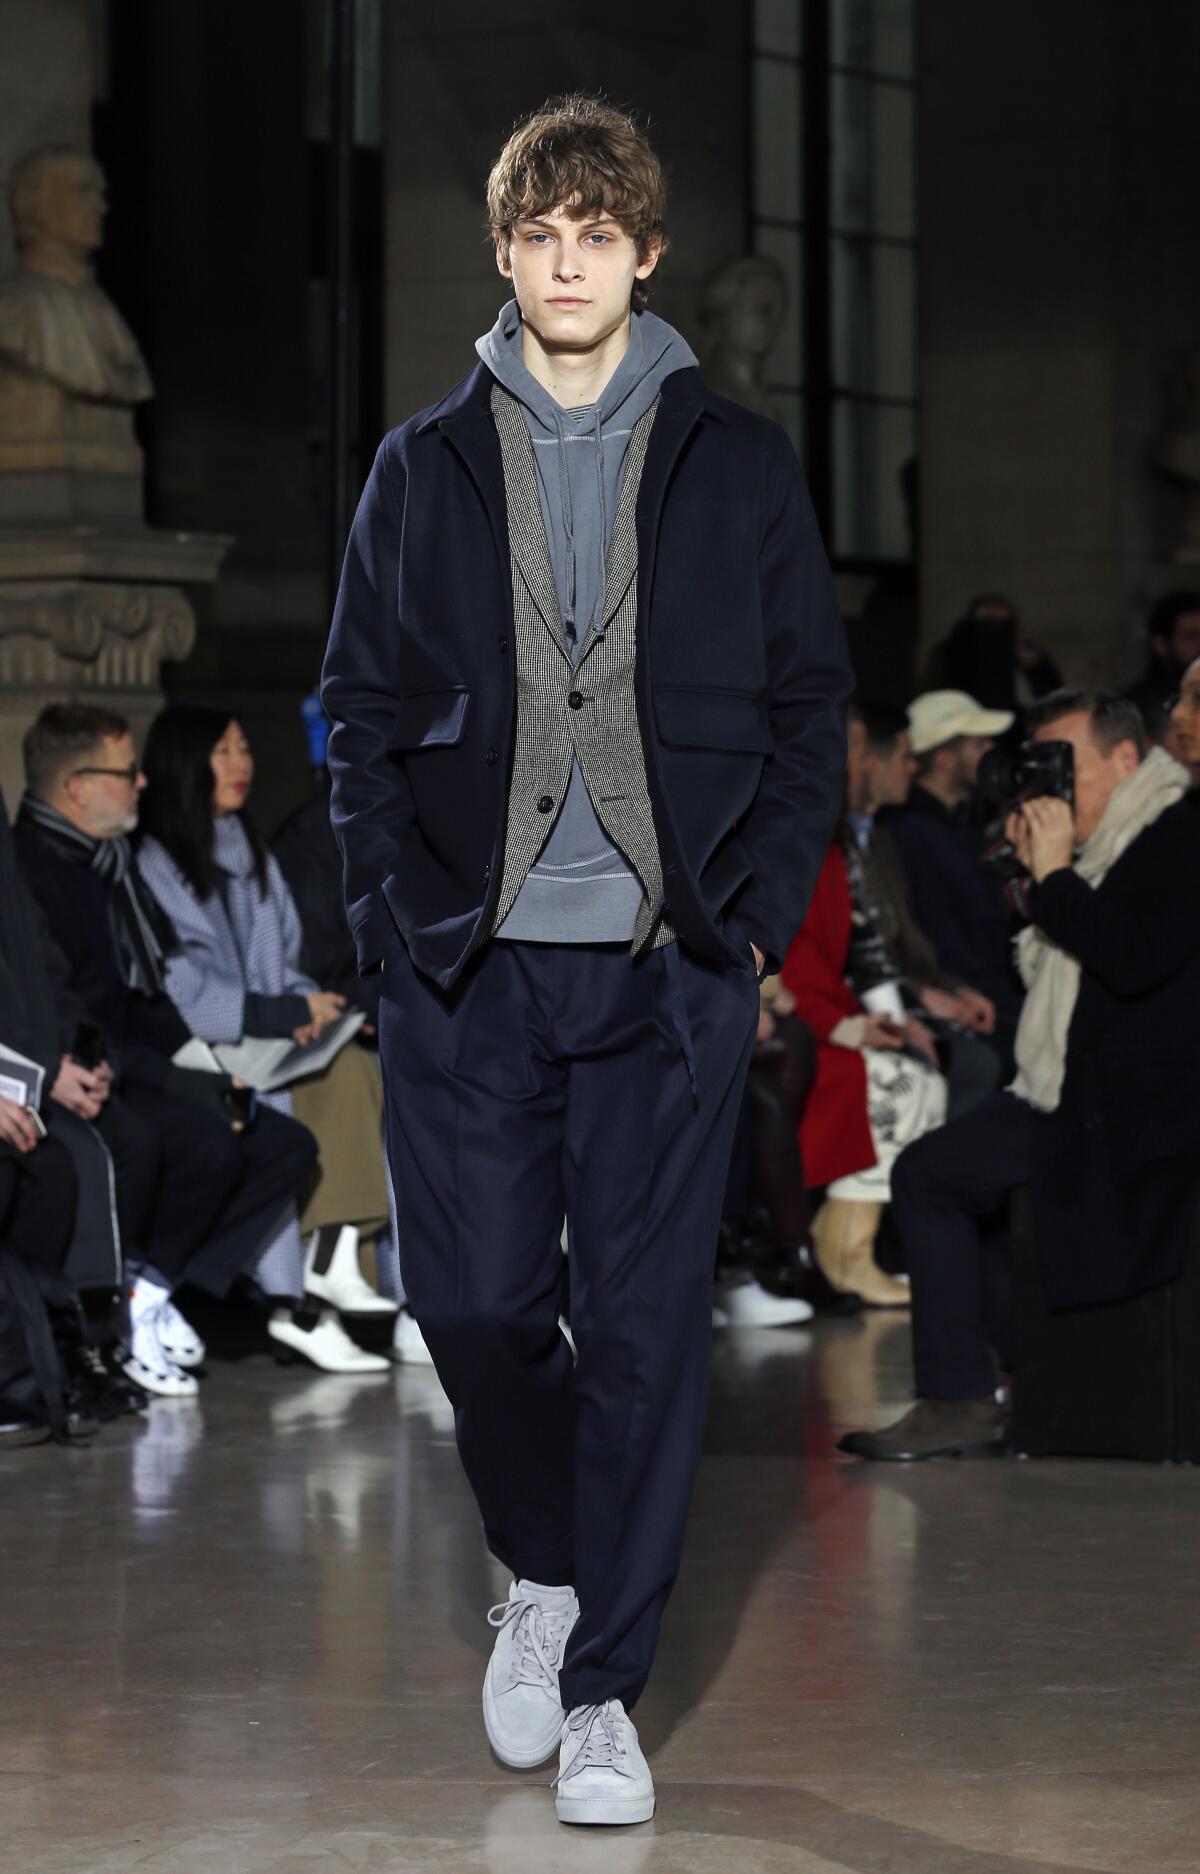 Some designers are incorporating the laid-back look of streetwear into their suits, like this runway outfit by Pierre Maheo of Officine Generale.